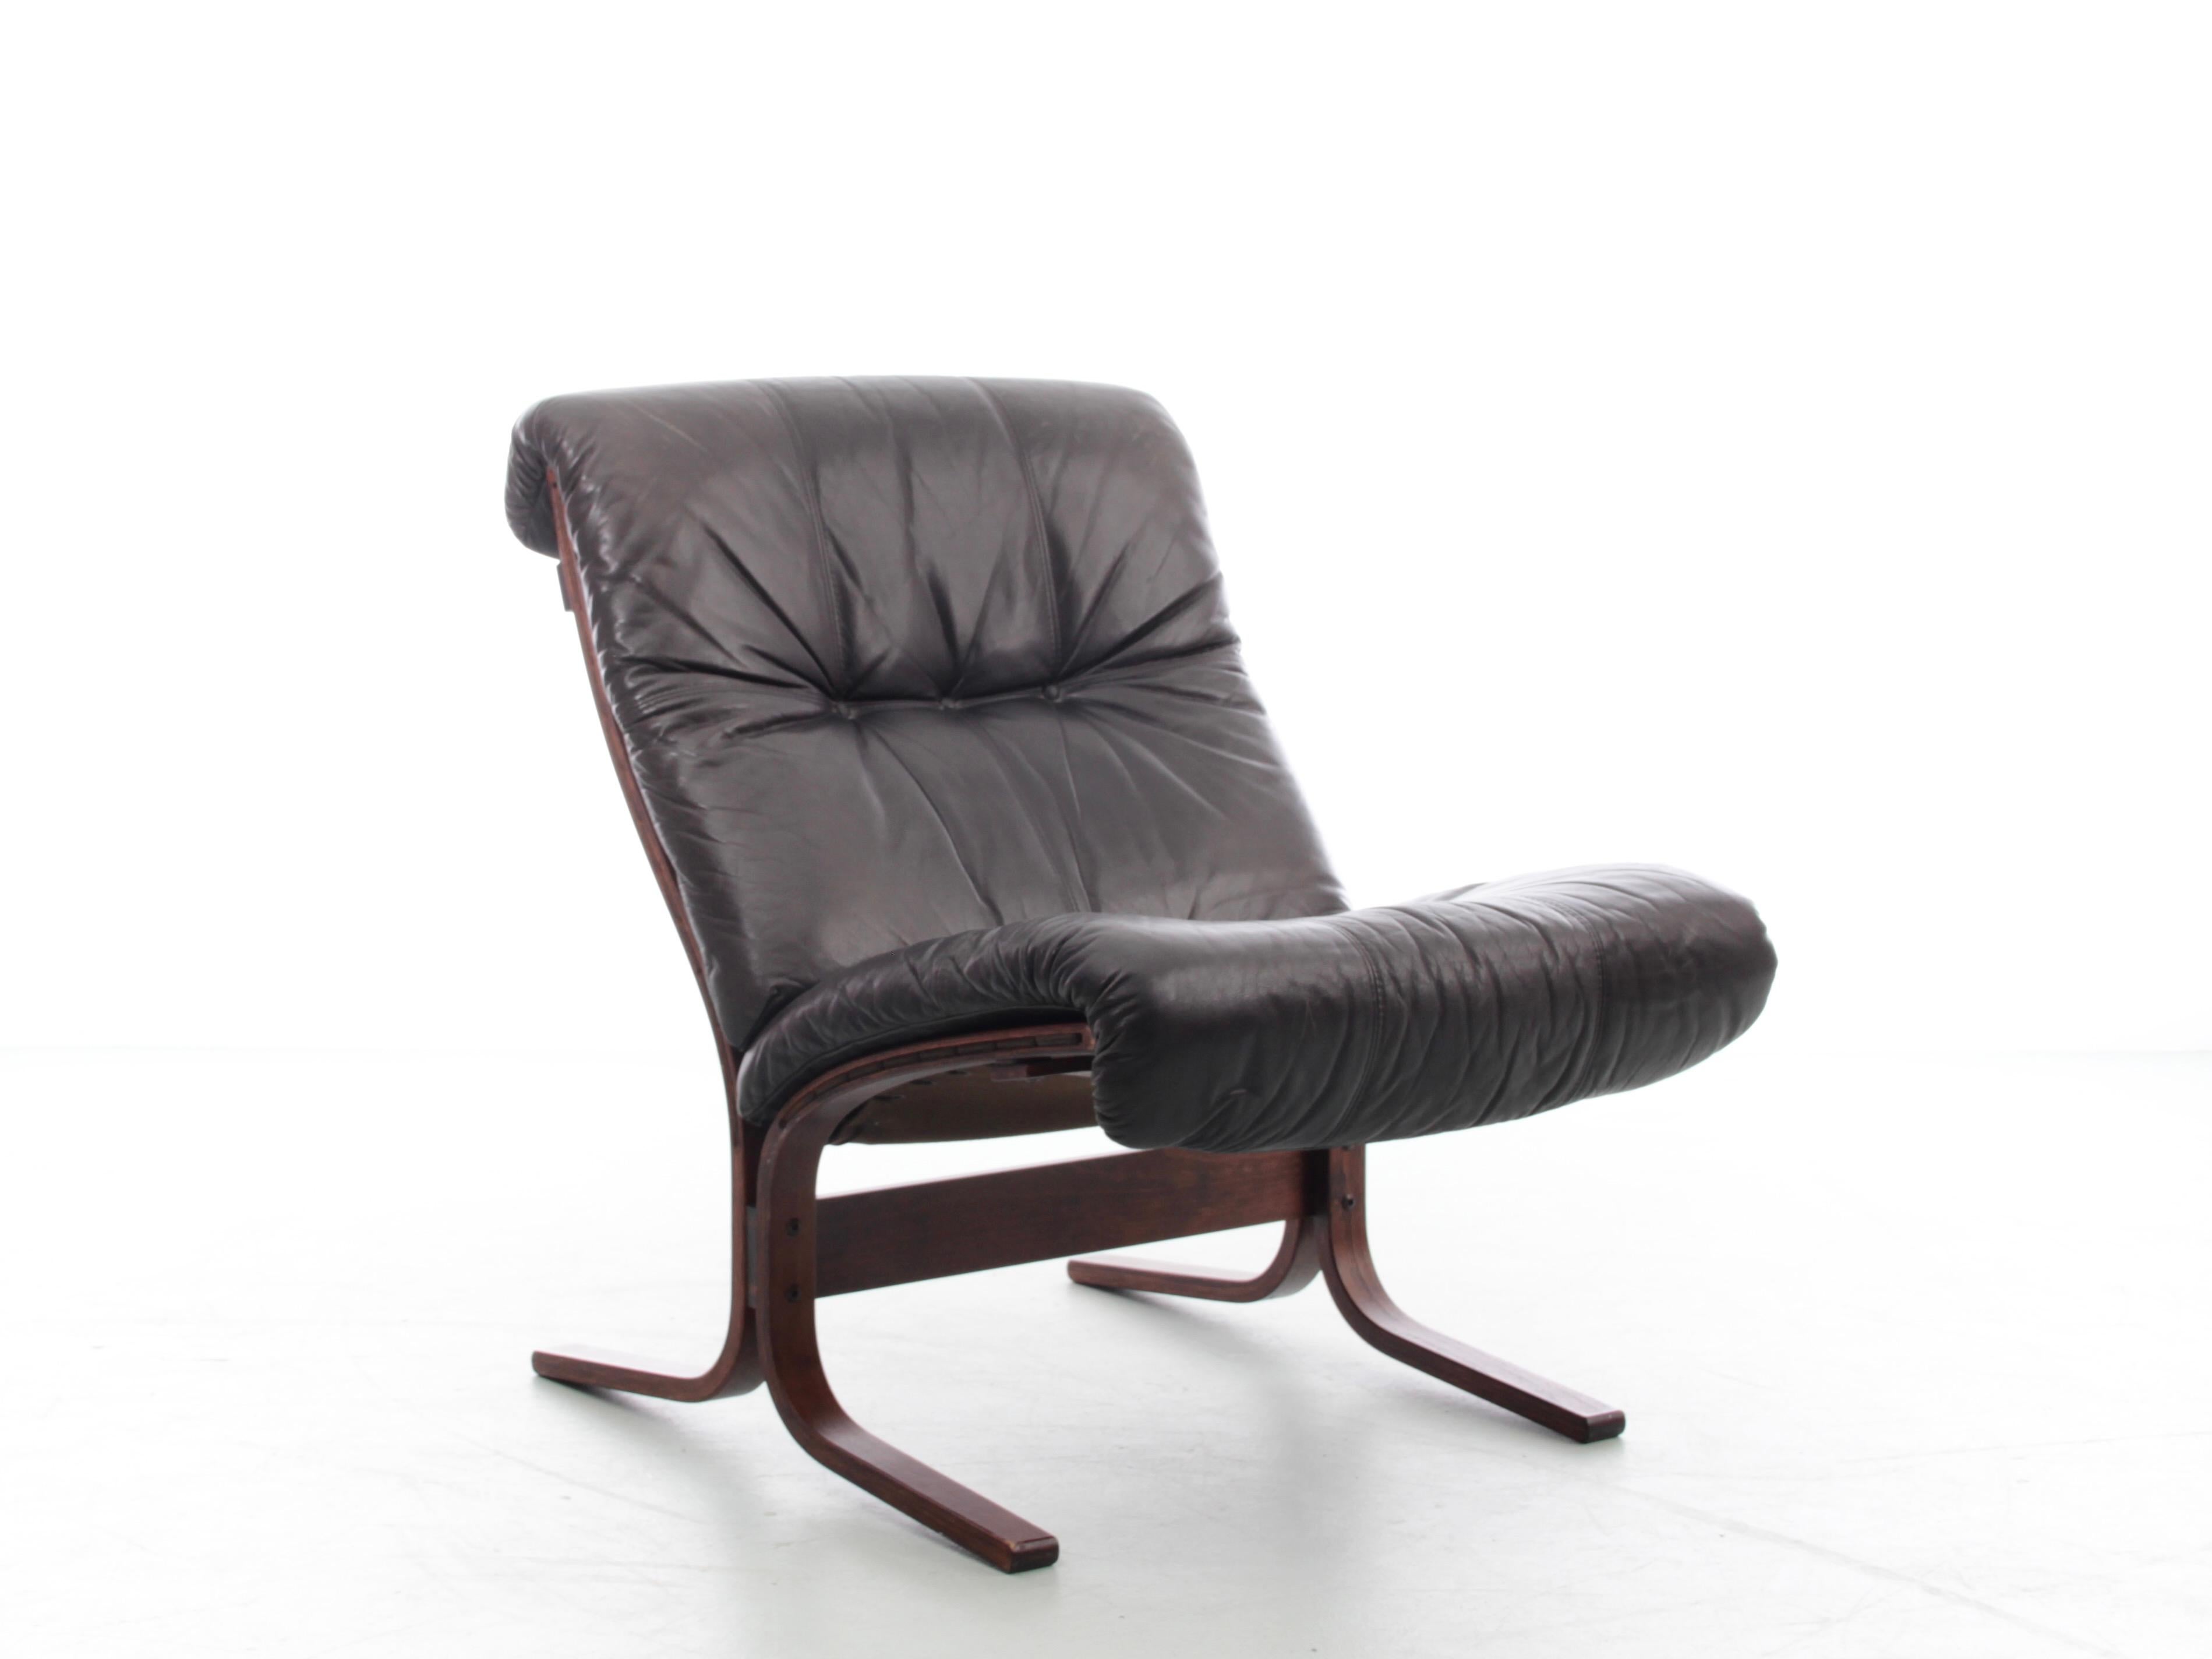 Siesta chair low back  by Ingmar Relling . Black leather. Excellent original condition.